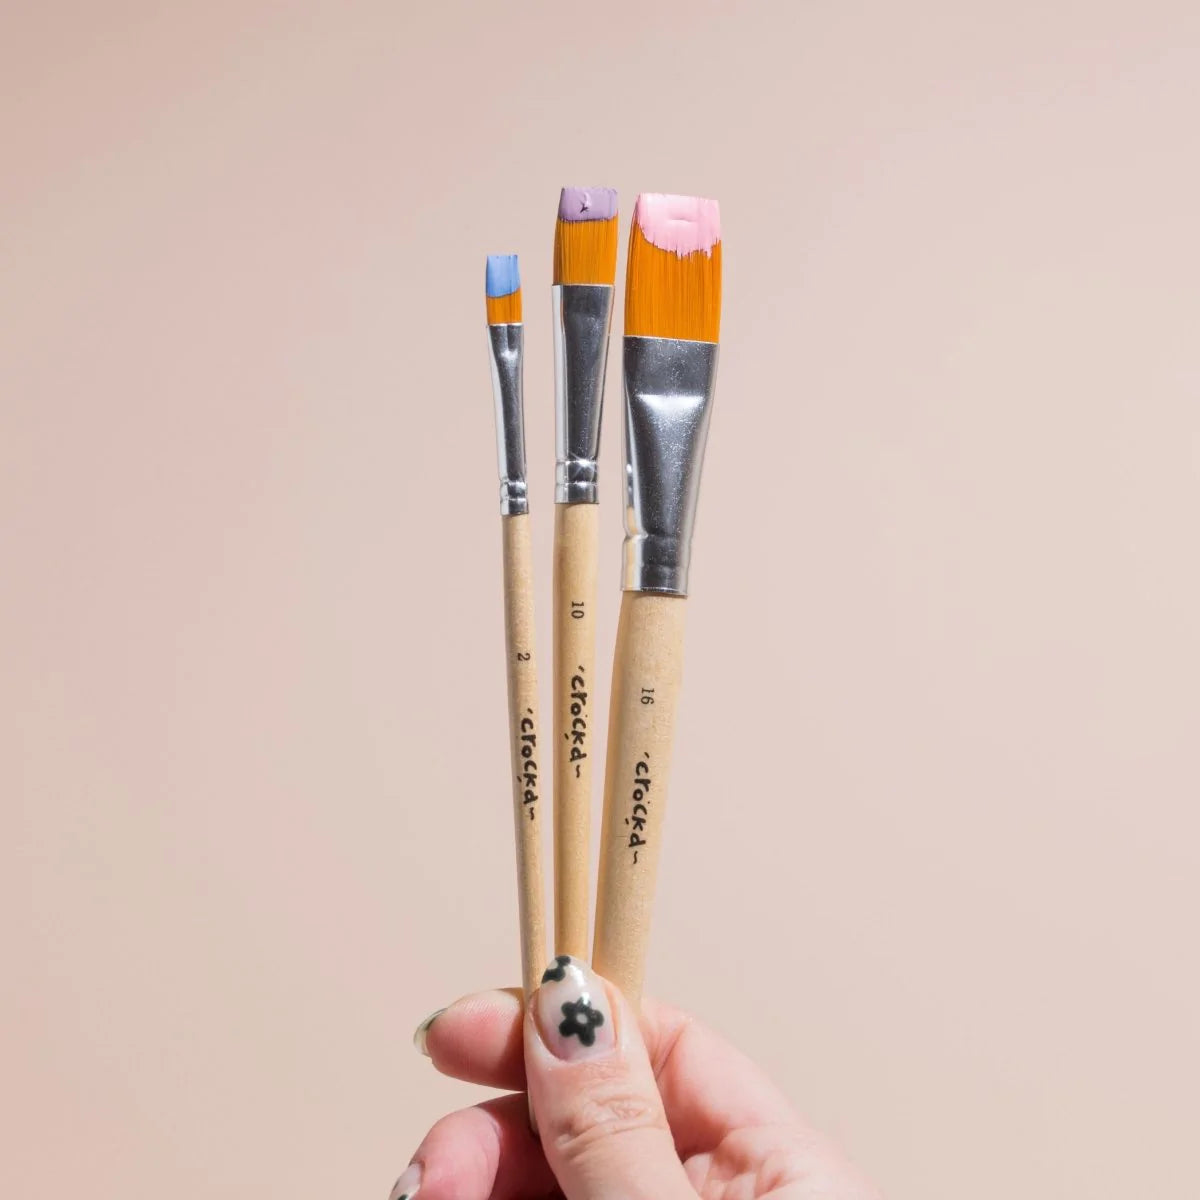 3 premium brushes that come with the Crockd’s acrylic paint kit